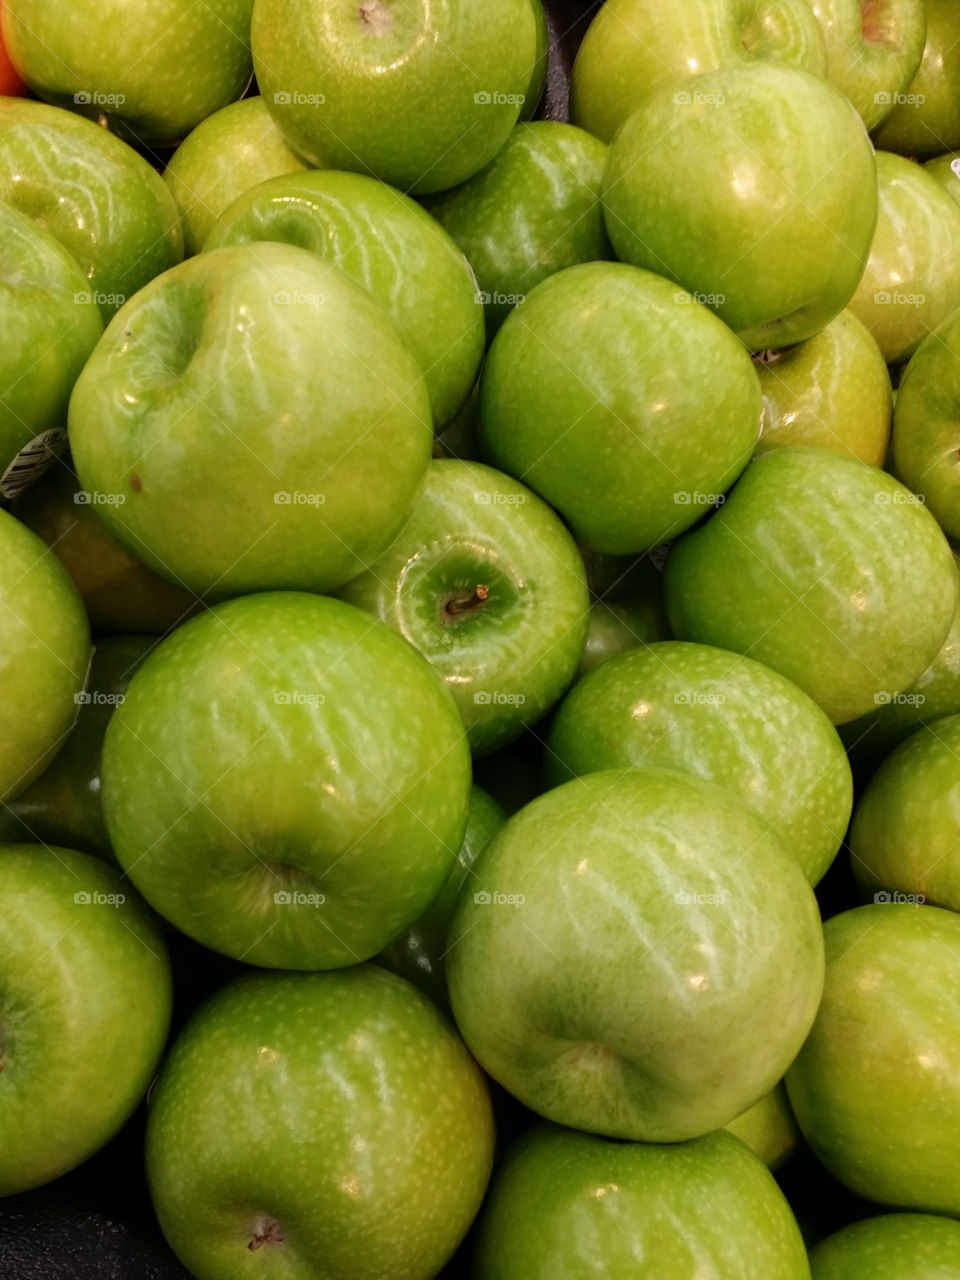 Delicious Green Apples